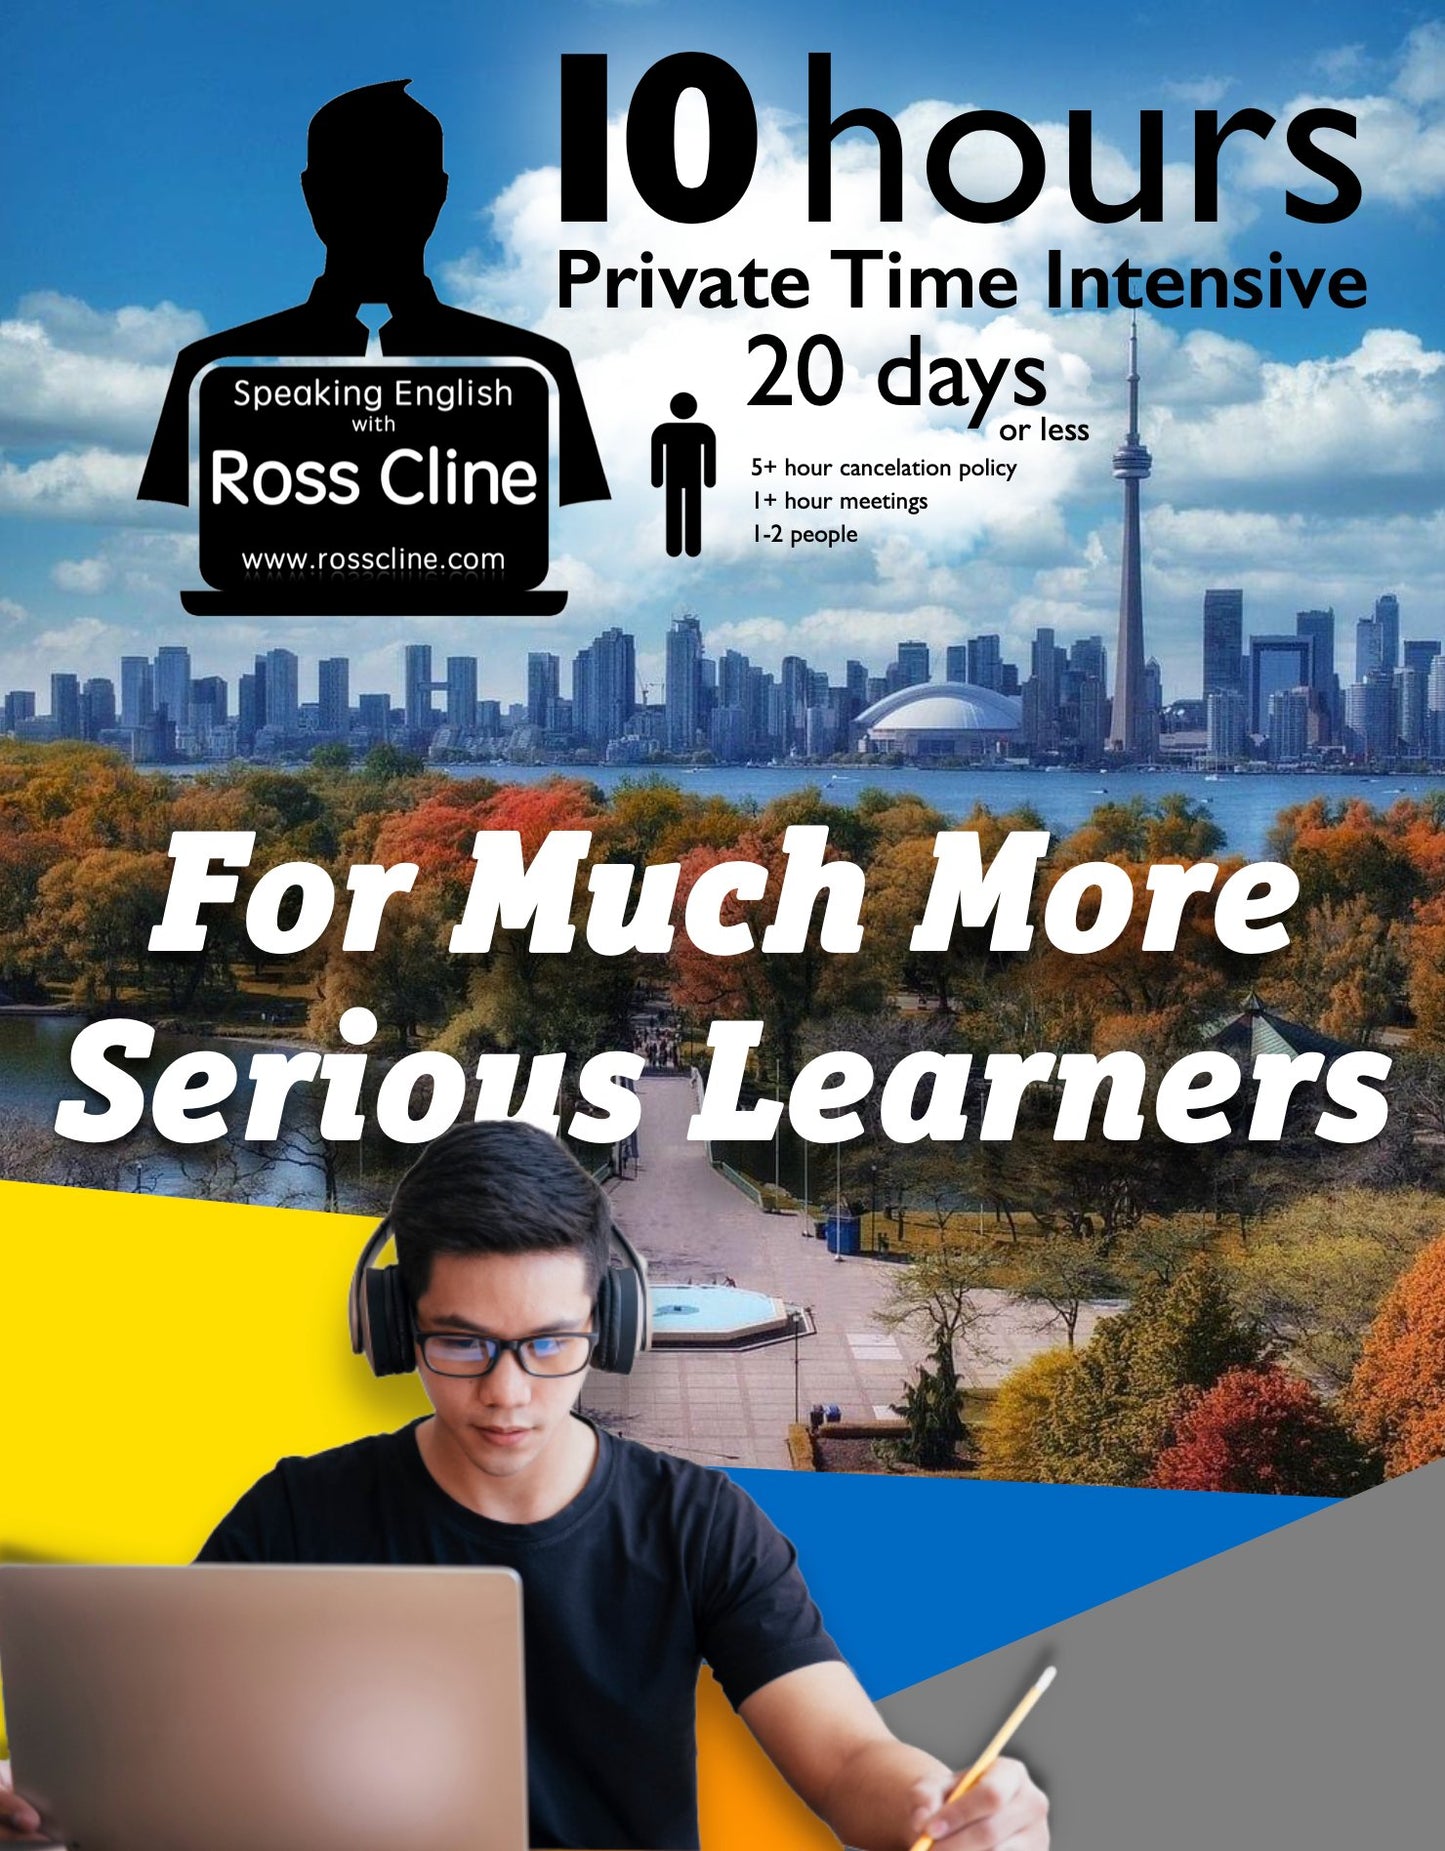 Private Time Intensive - www.rosscline.com